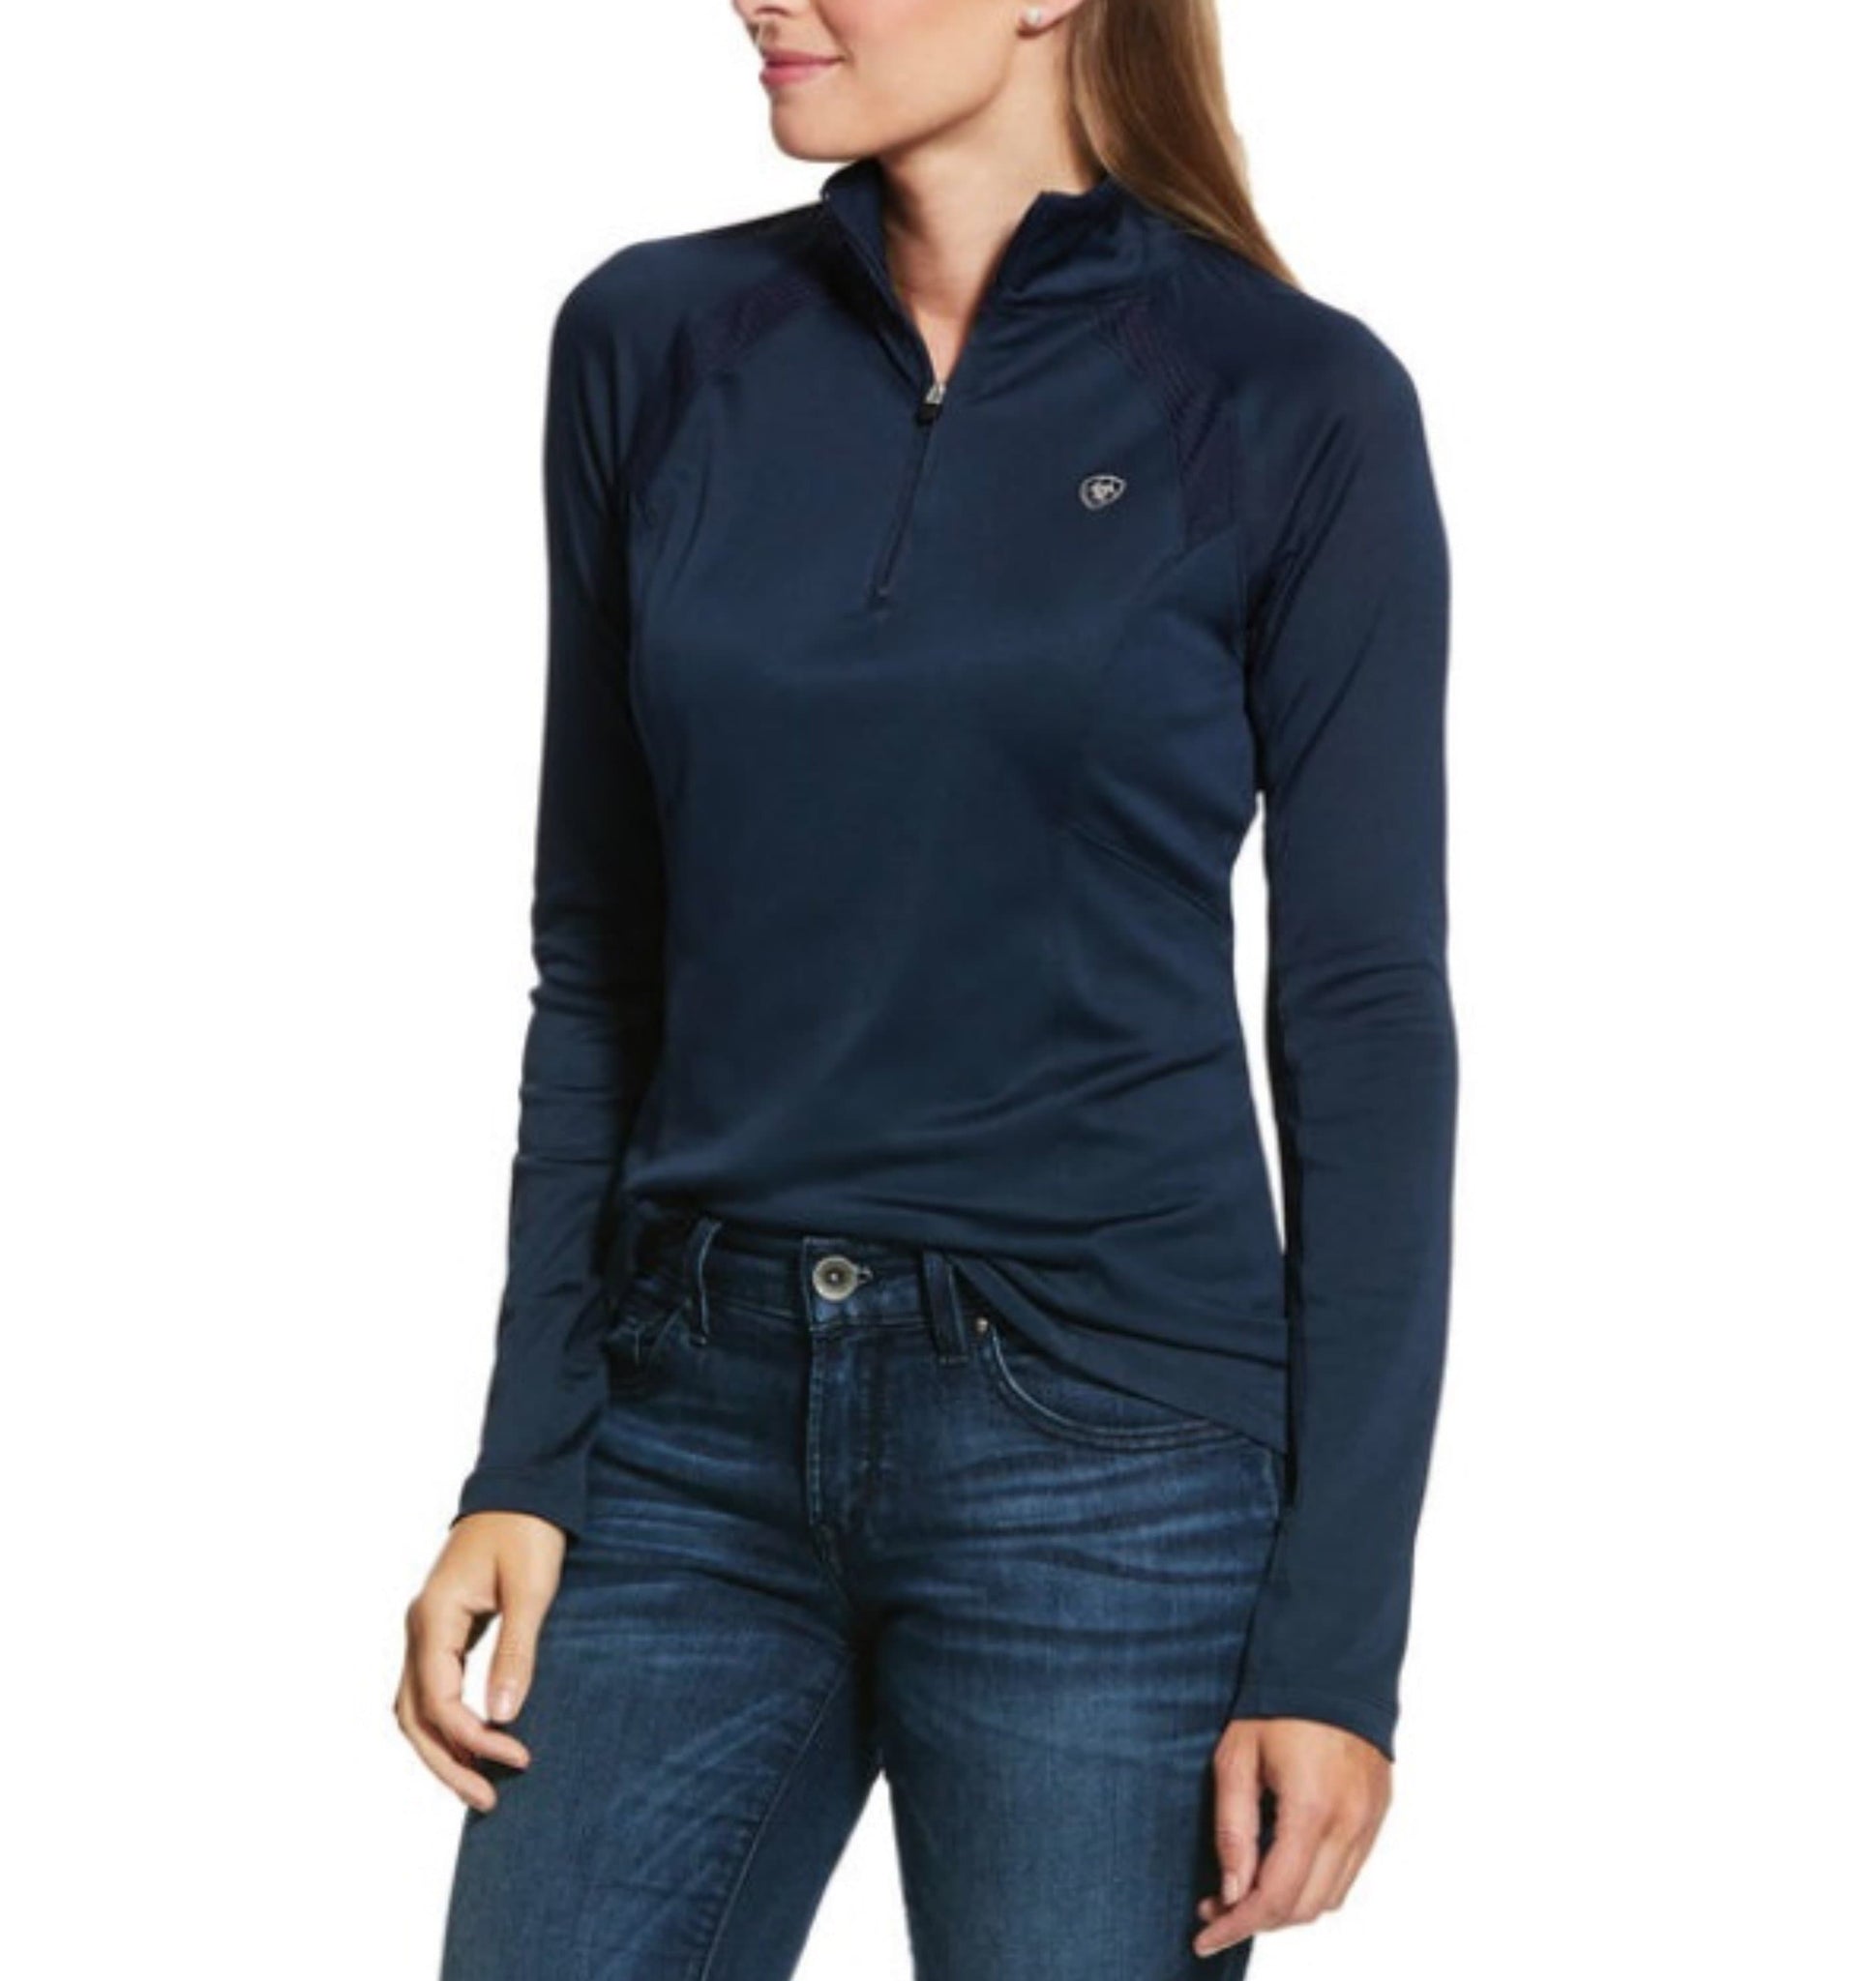 Ariat Sunstopper Long Sleeve Top with 1/4 Zip